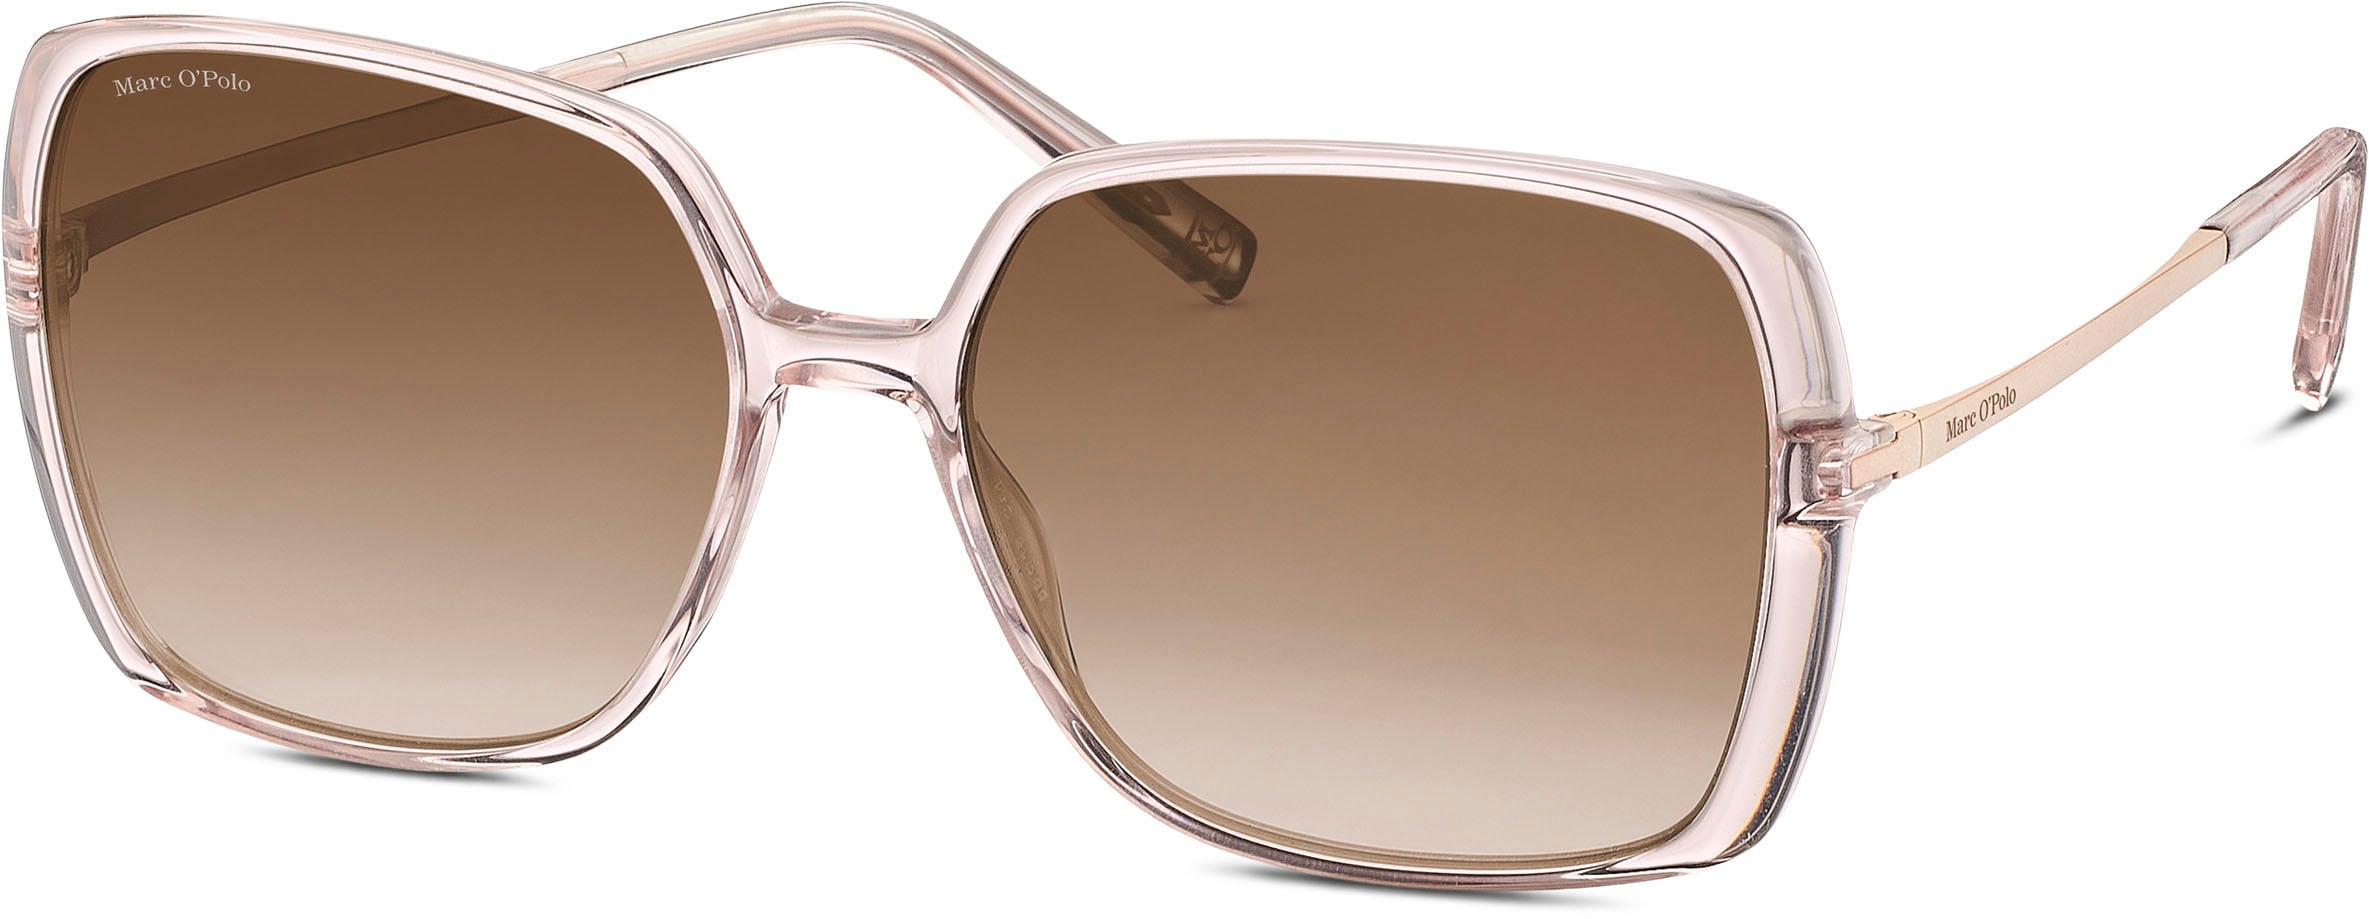 Marc O\'Polo Sonnenbrille »Modell 506190«, Karree-From online bei